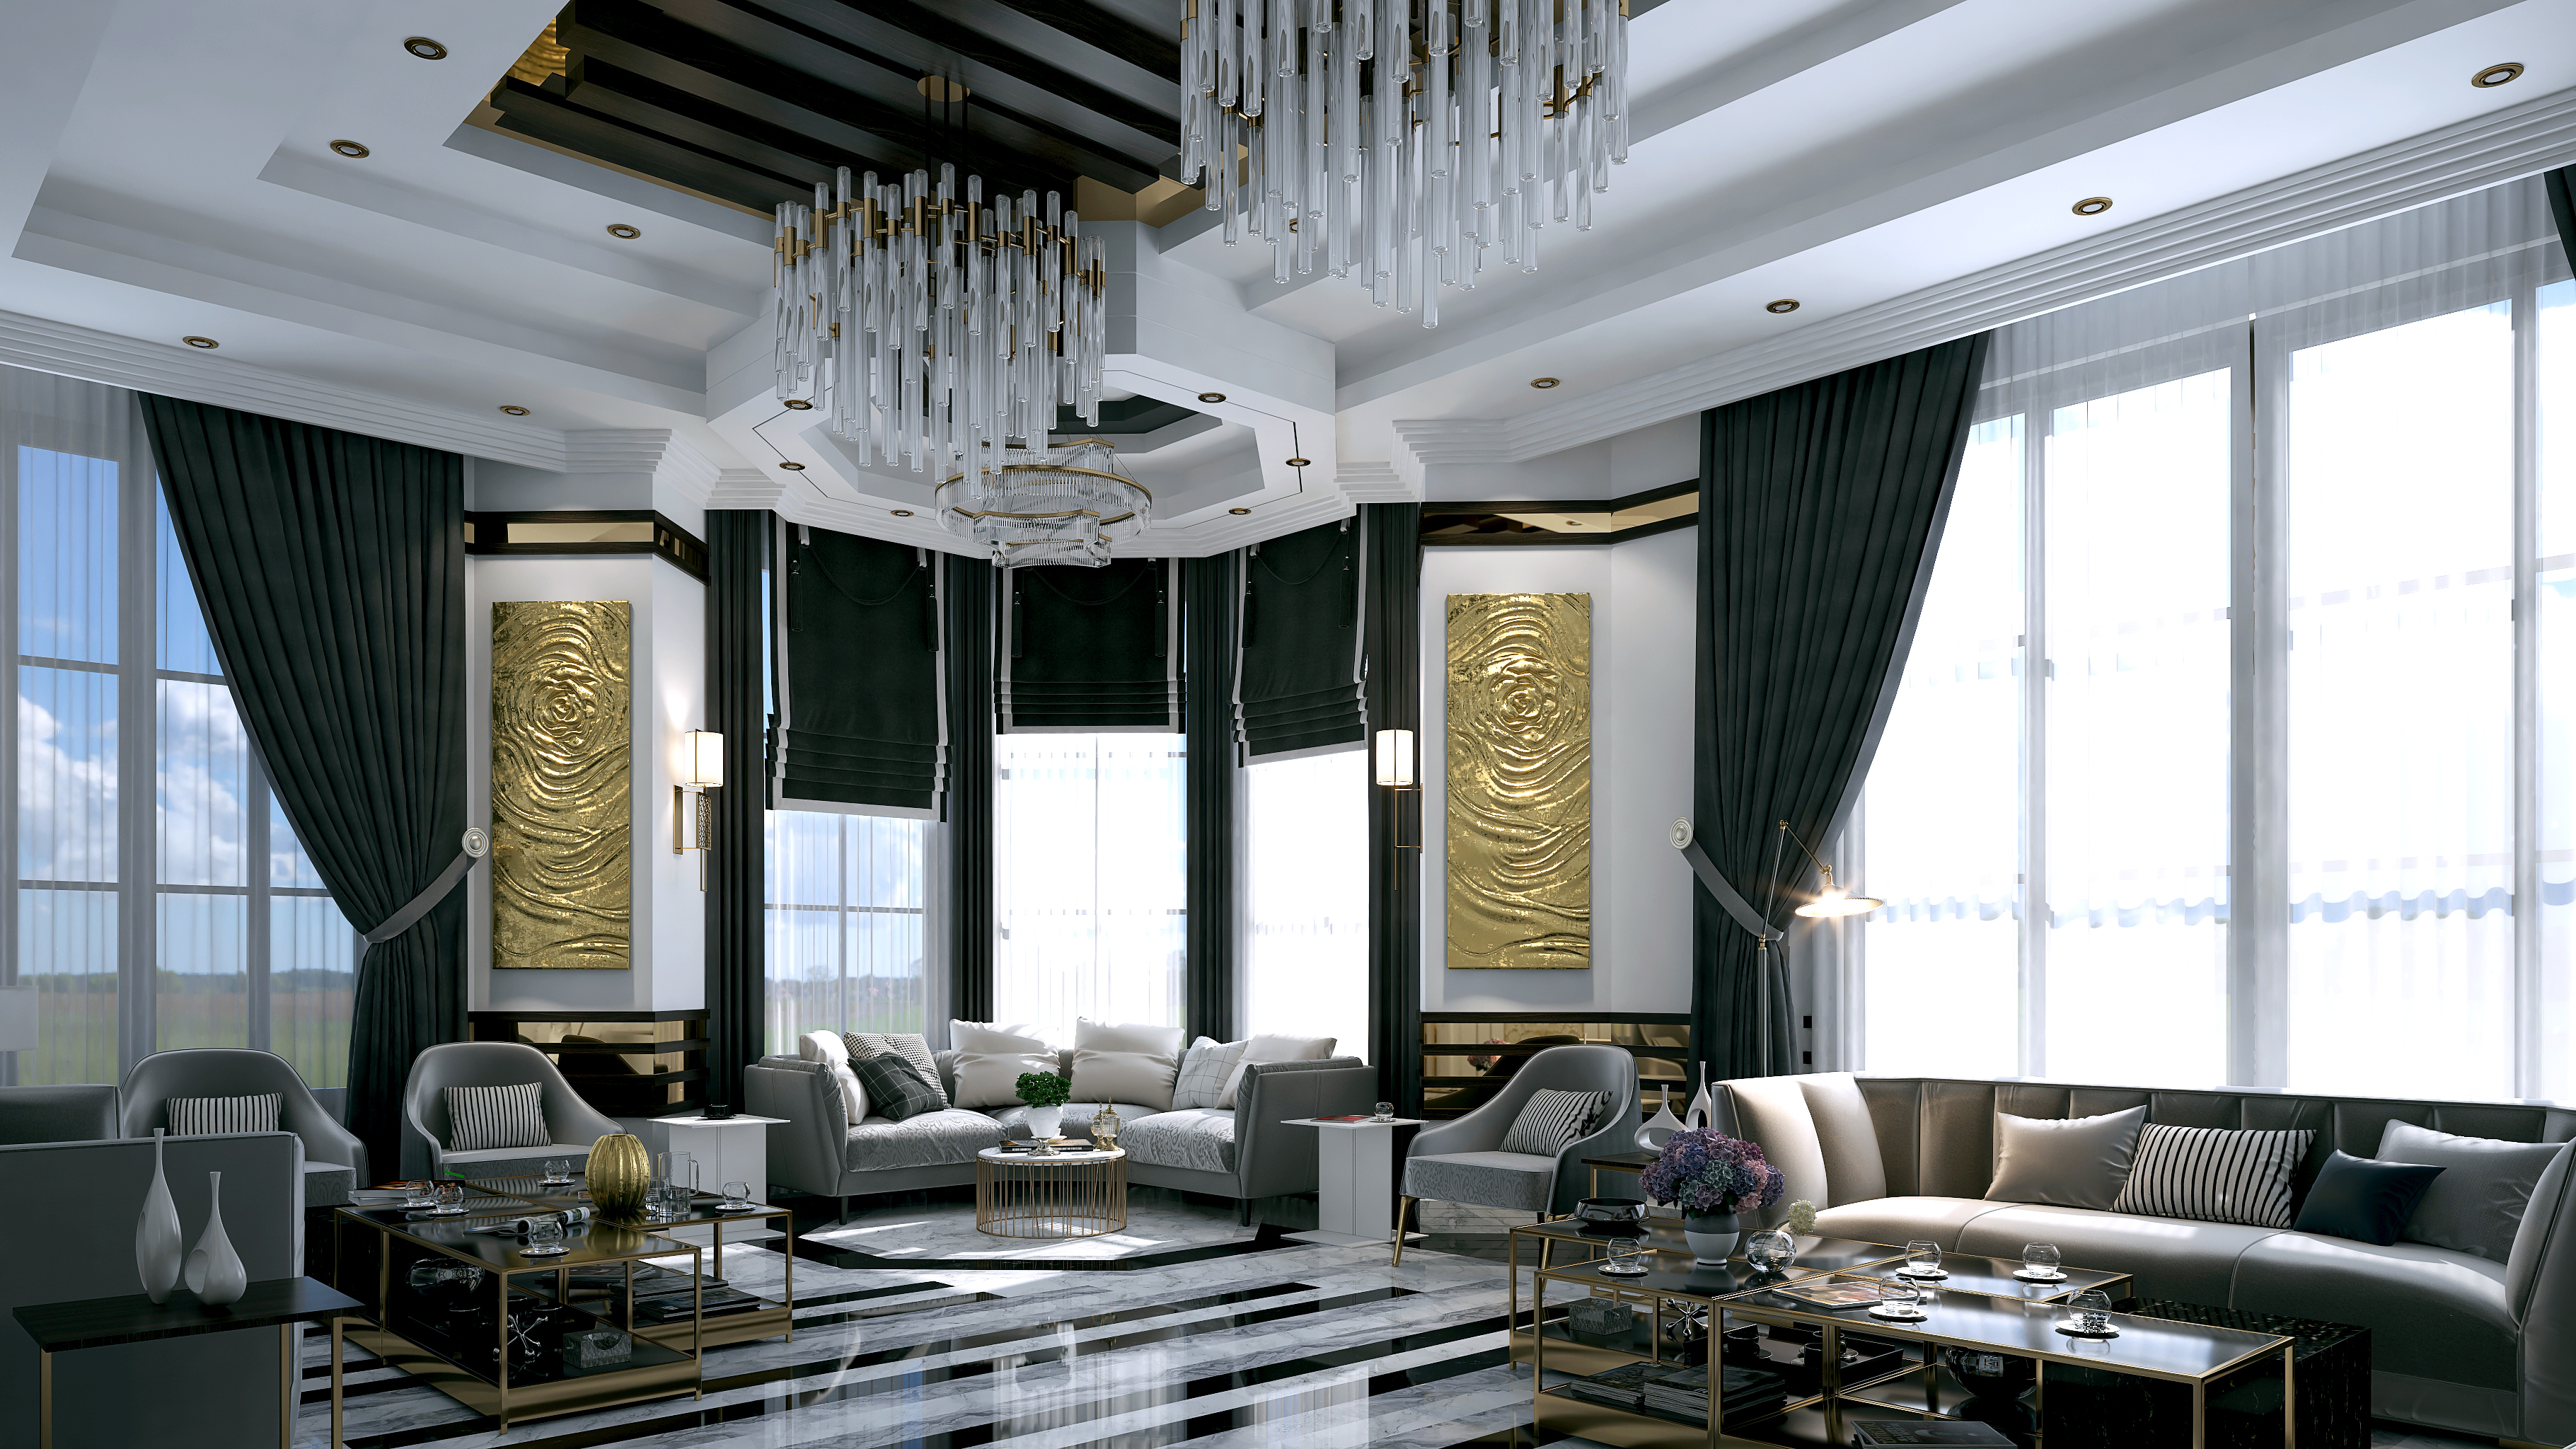 Modern living interiors in 3d max vray 3.0 image